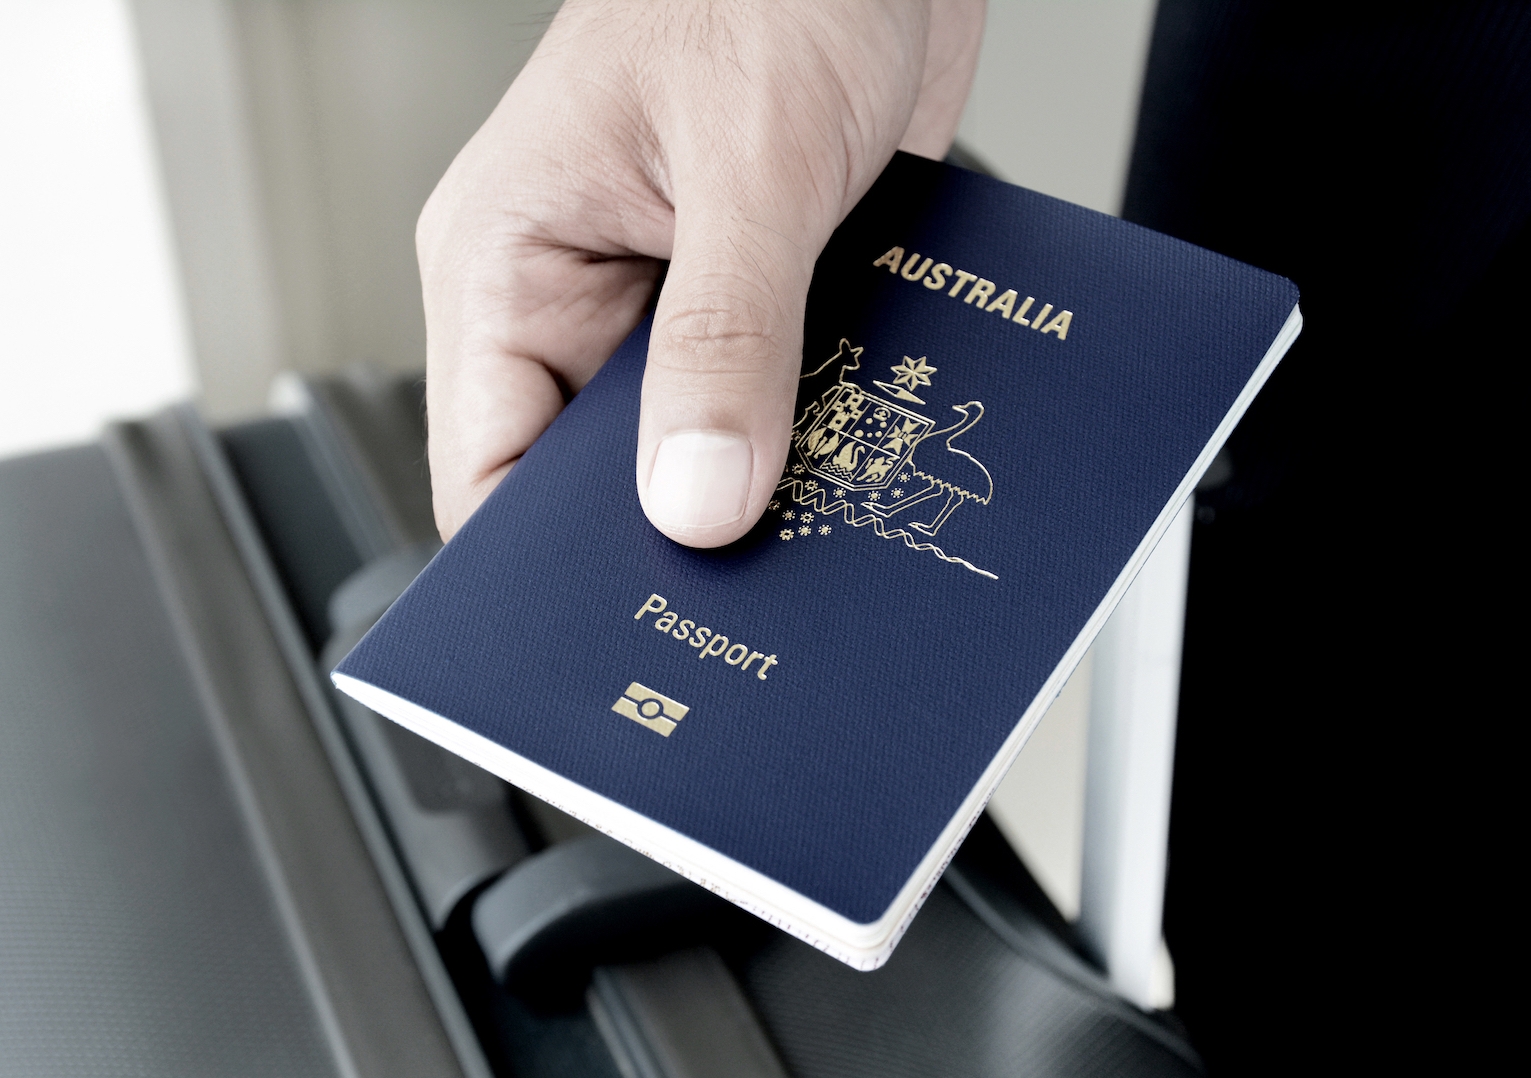 Need To Renew Your Passport The Weird History Of Australian Passports Explains How They Got So